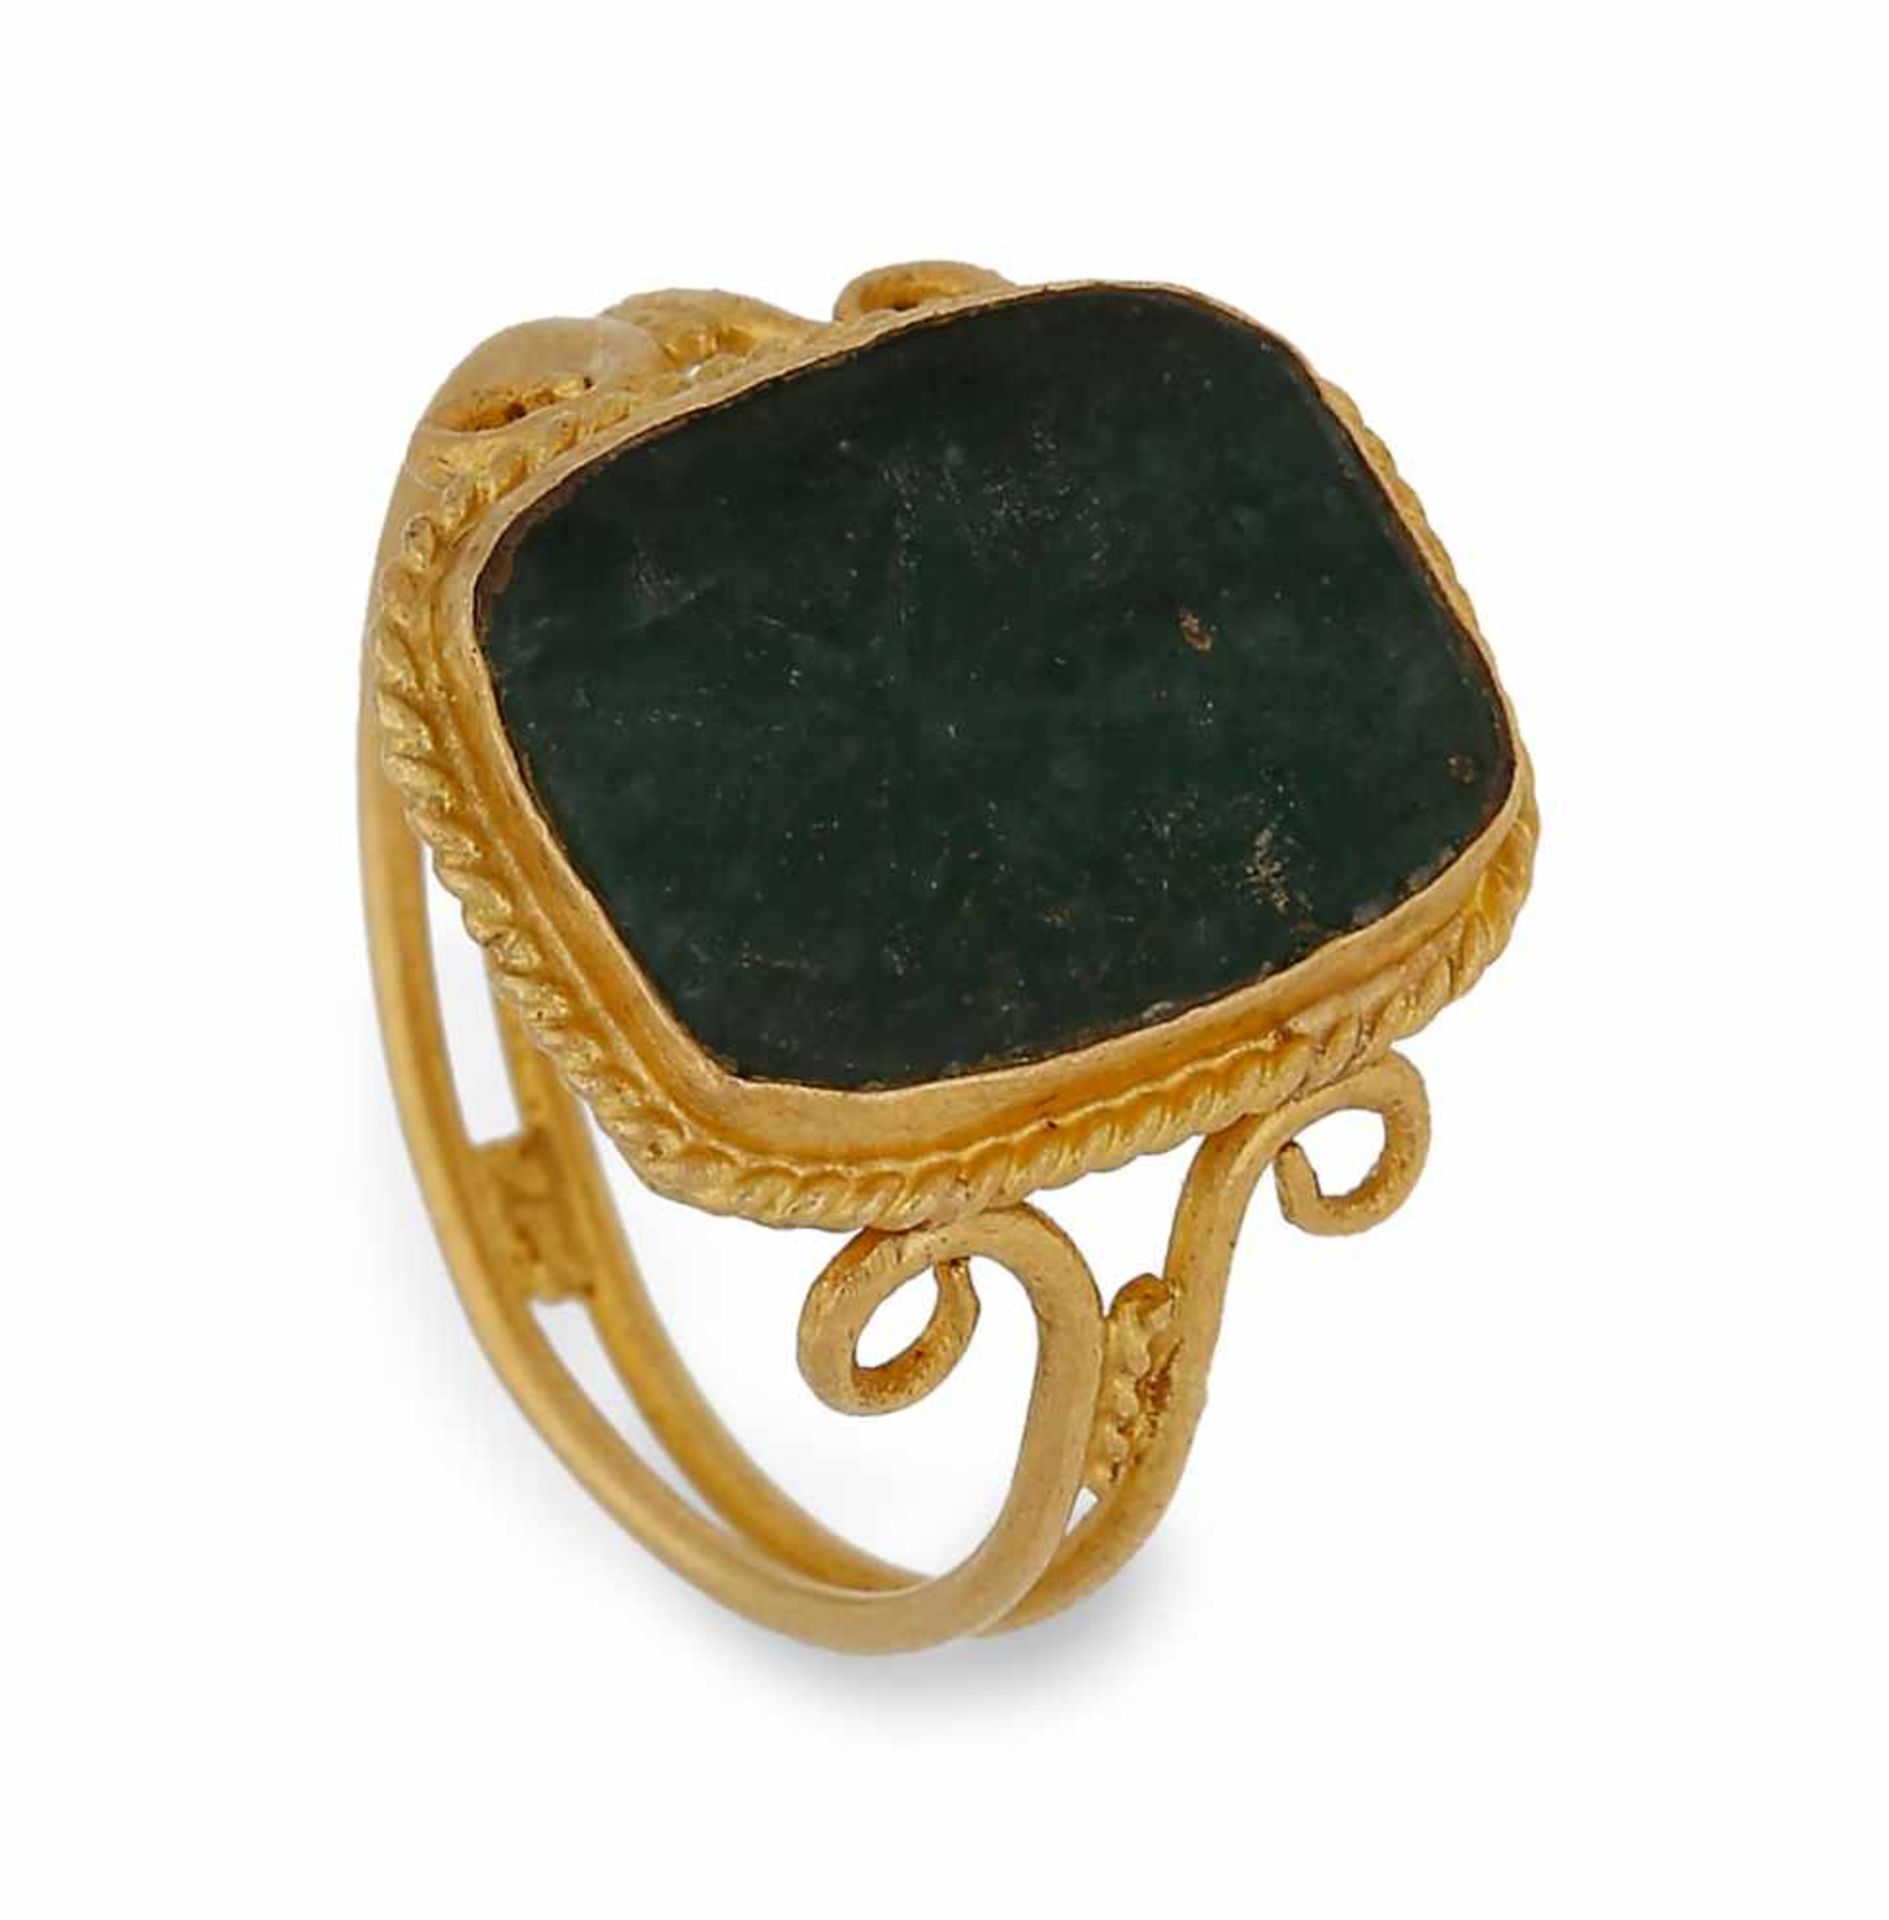 Jasper ring, early 19th Century.Gold, probably 22K, and carved jasper. 3.6 gr. - Image 2 of 2